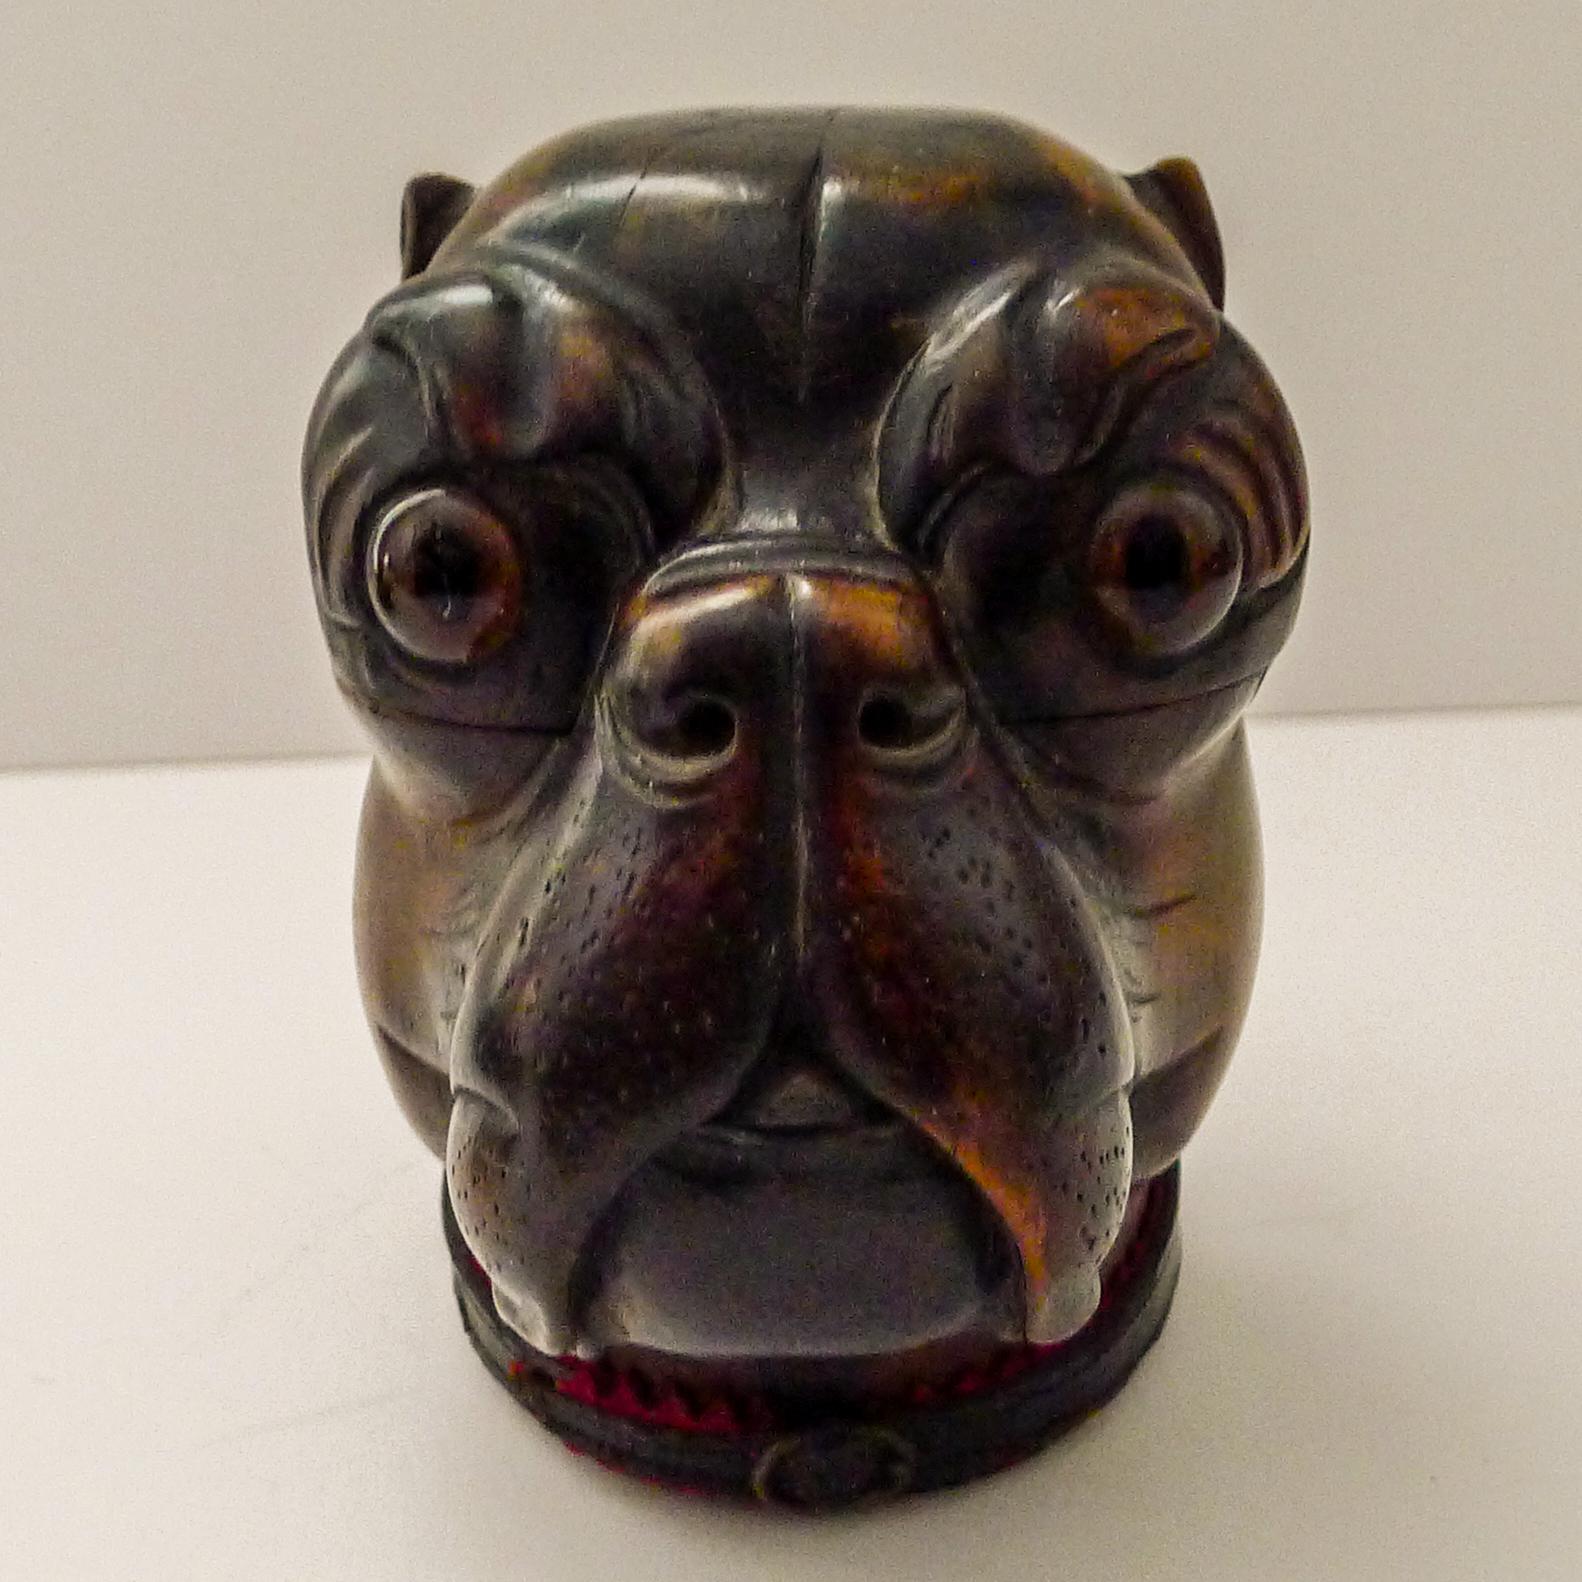 A wonderful and very large example of a figural Black Forest inkwell in the form of a Dog's head, with a beautiful bright patina.

He retains his original large glass eyes, without damage. The original collar is also intact, with superb detailing